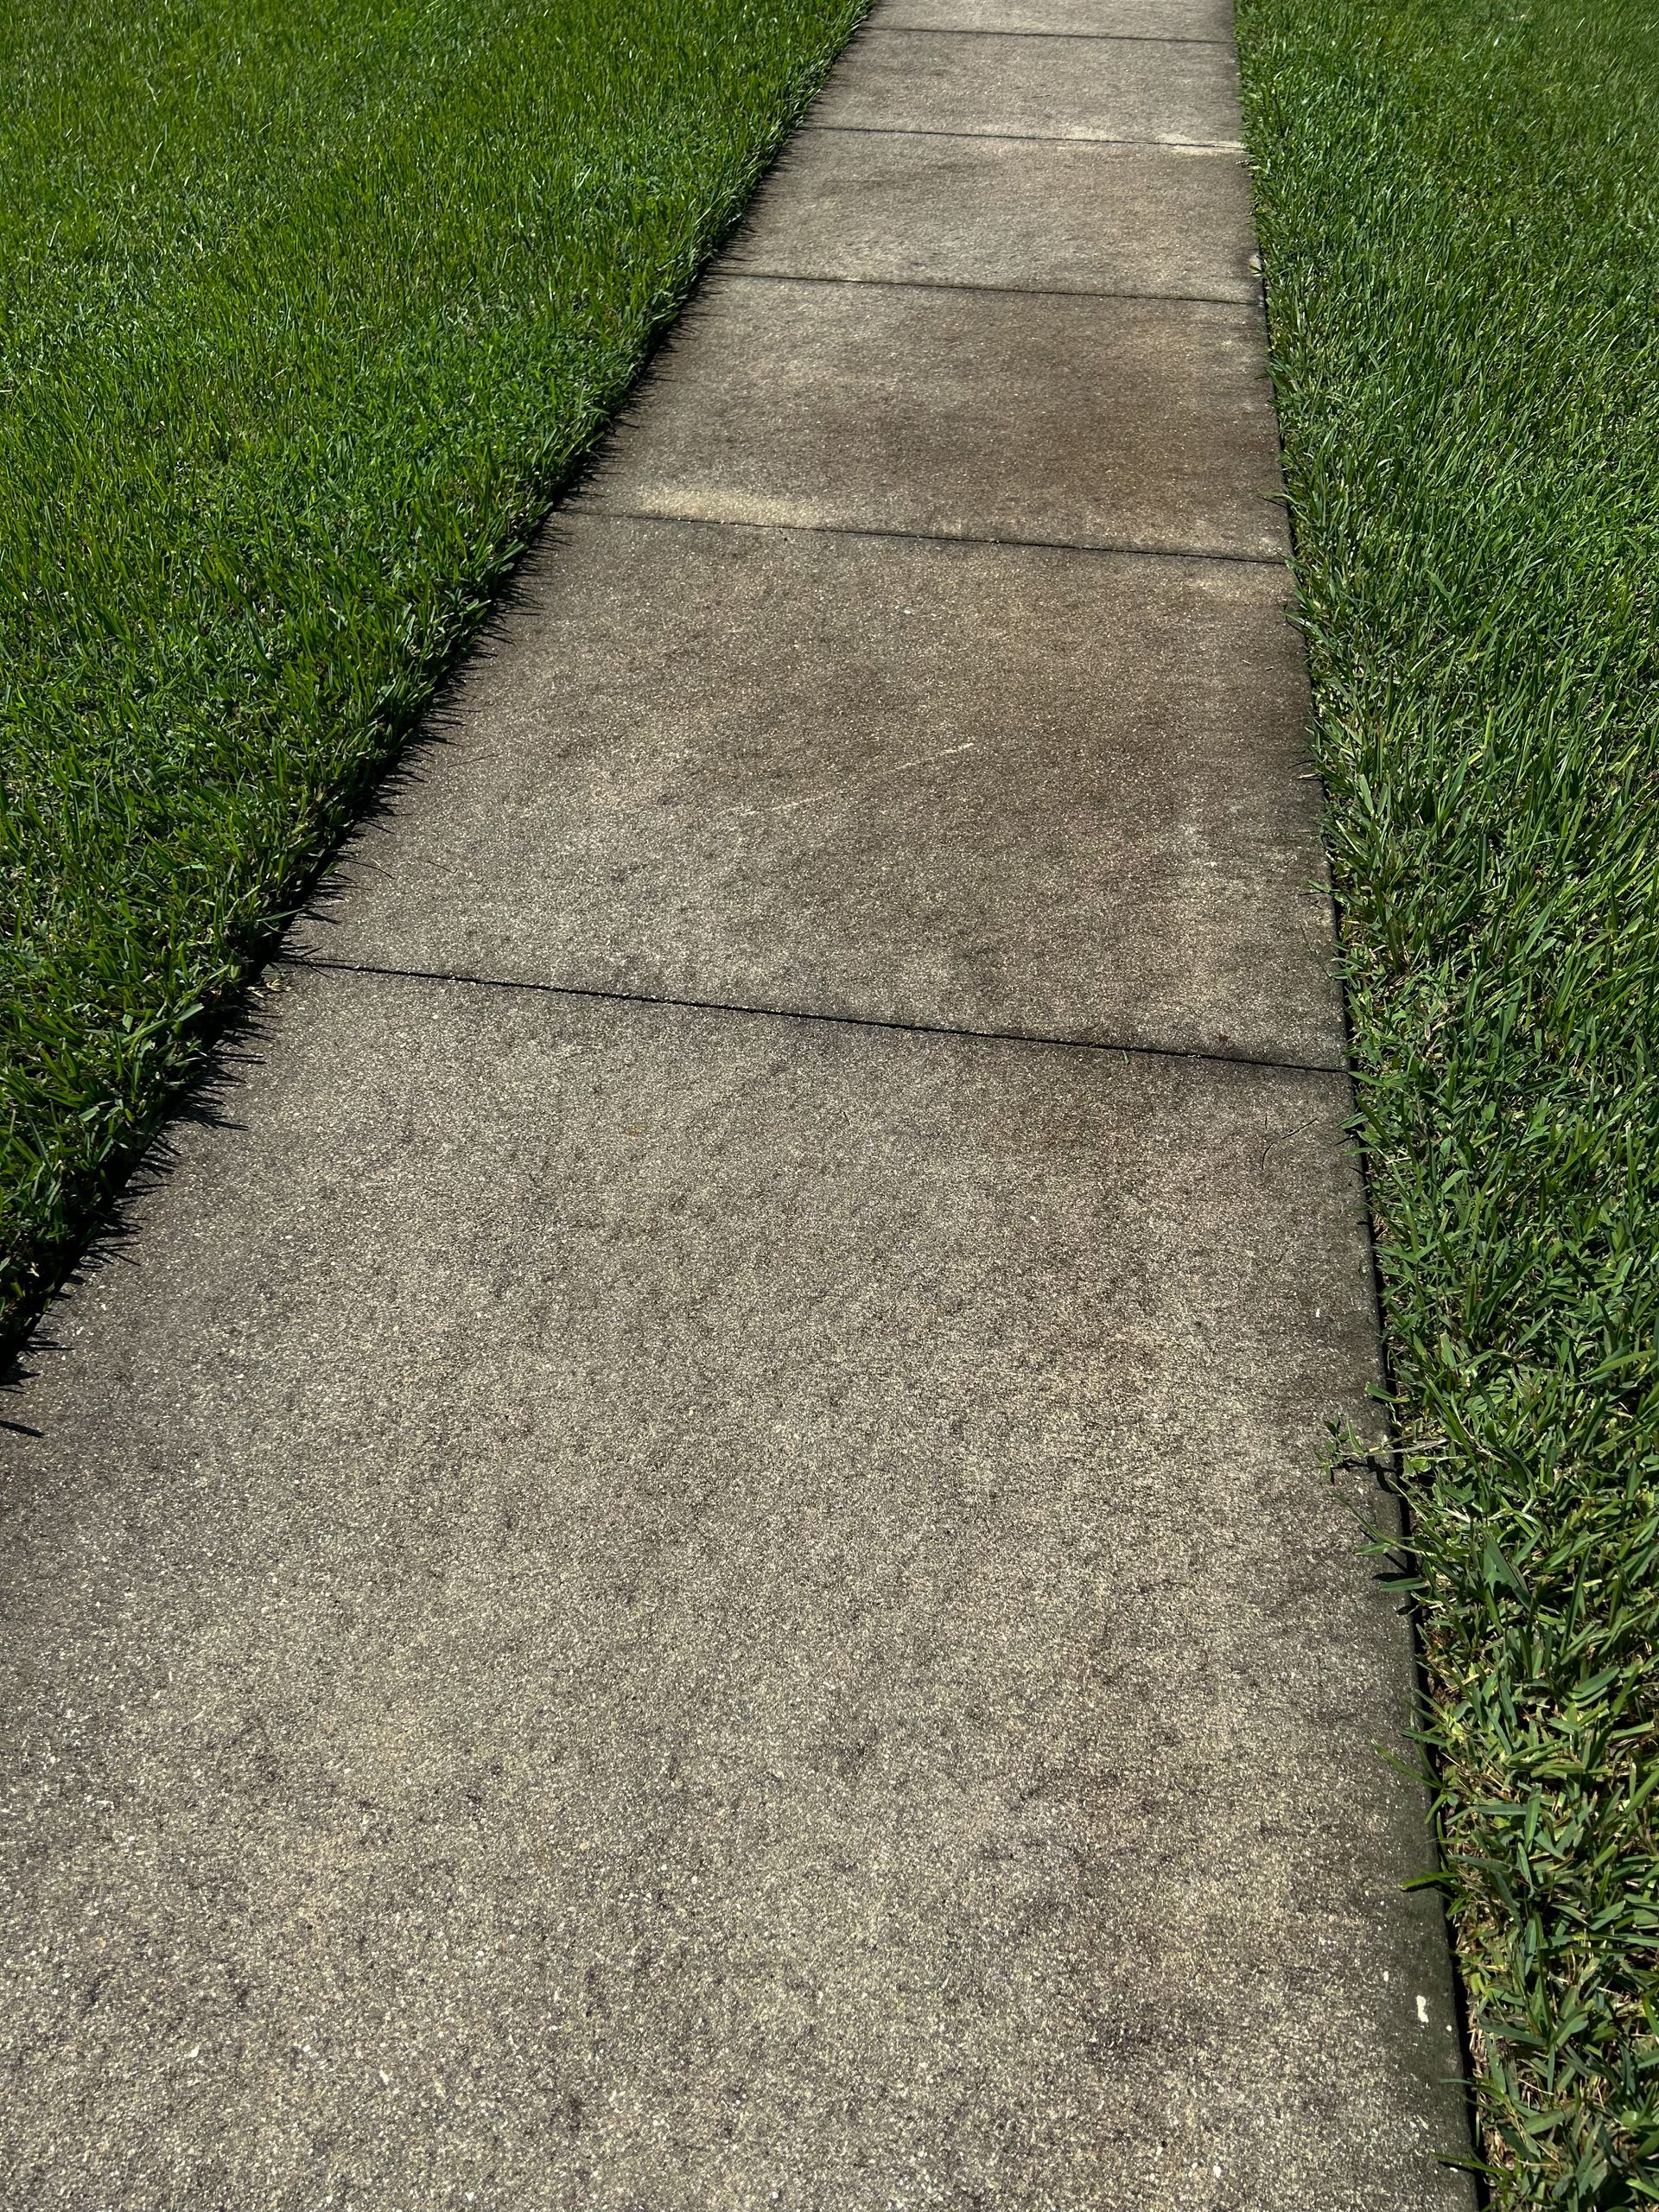 Pressure washing dirt, grime, mold and mildew off of a sidewalk
